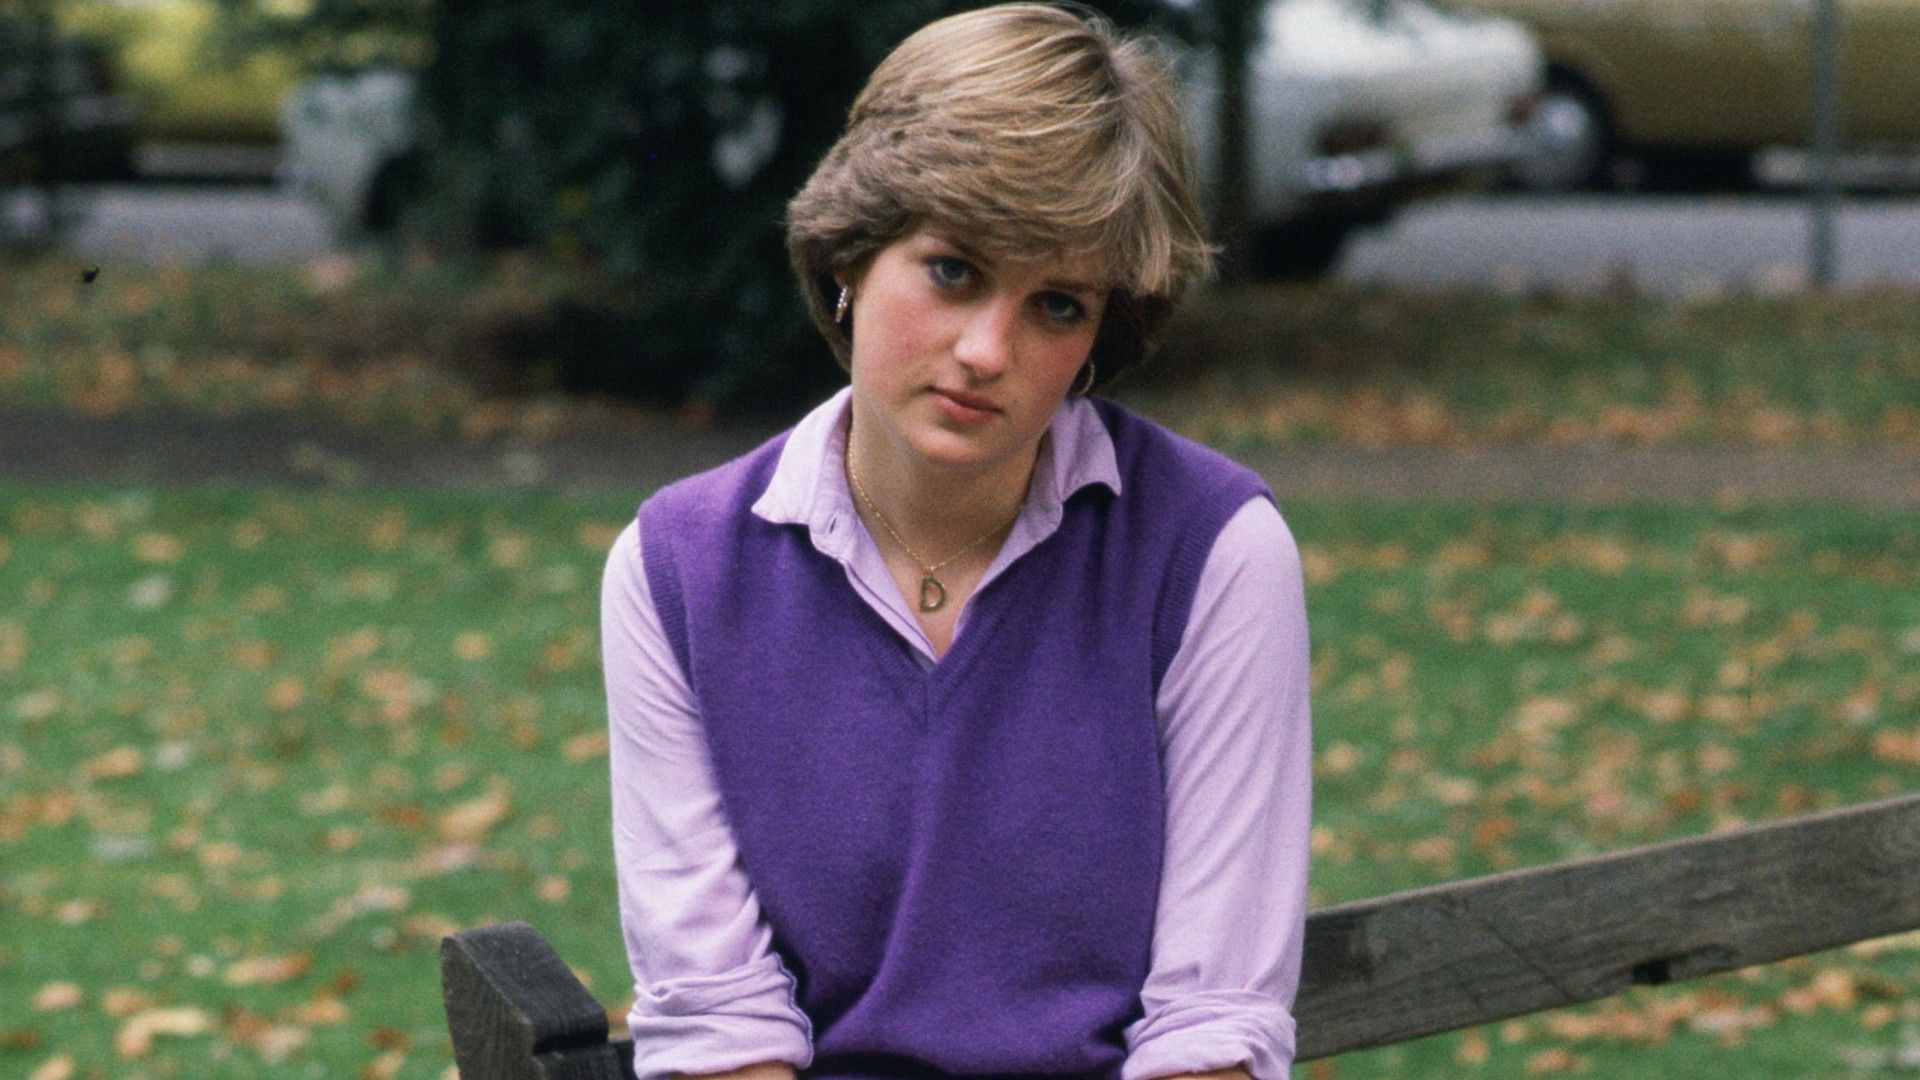 <p>                     Princess Diana was given a typically aristocratic upbringing, and as such, attended finishing school from the age of 16-17, an experience designed to provide her with the social skills required to live as a woman in the upper echelons of society.                   </p>                                      <p>                     She attended a finishing school in Switzerland, the Institut Alpin Videmanette, where she was taught things like French, dressmaking, skiing and cooking. The school however shut down in 1991.                   </p>